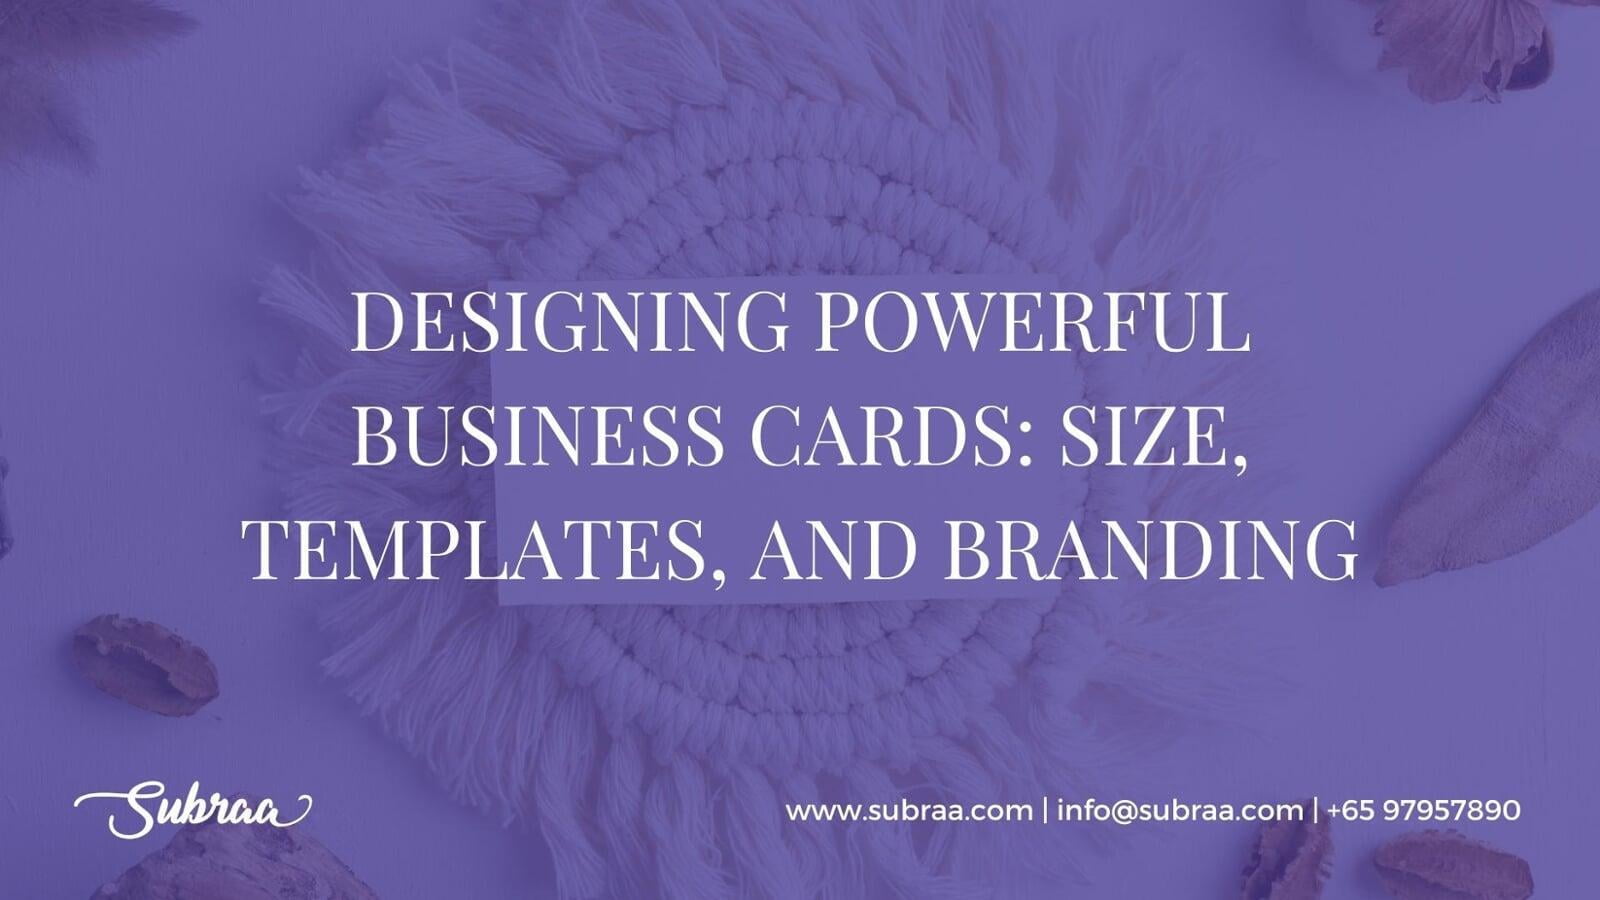 Designing Powerful Business Cards - Size, Templates, and Branding